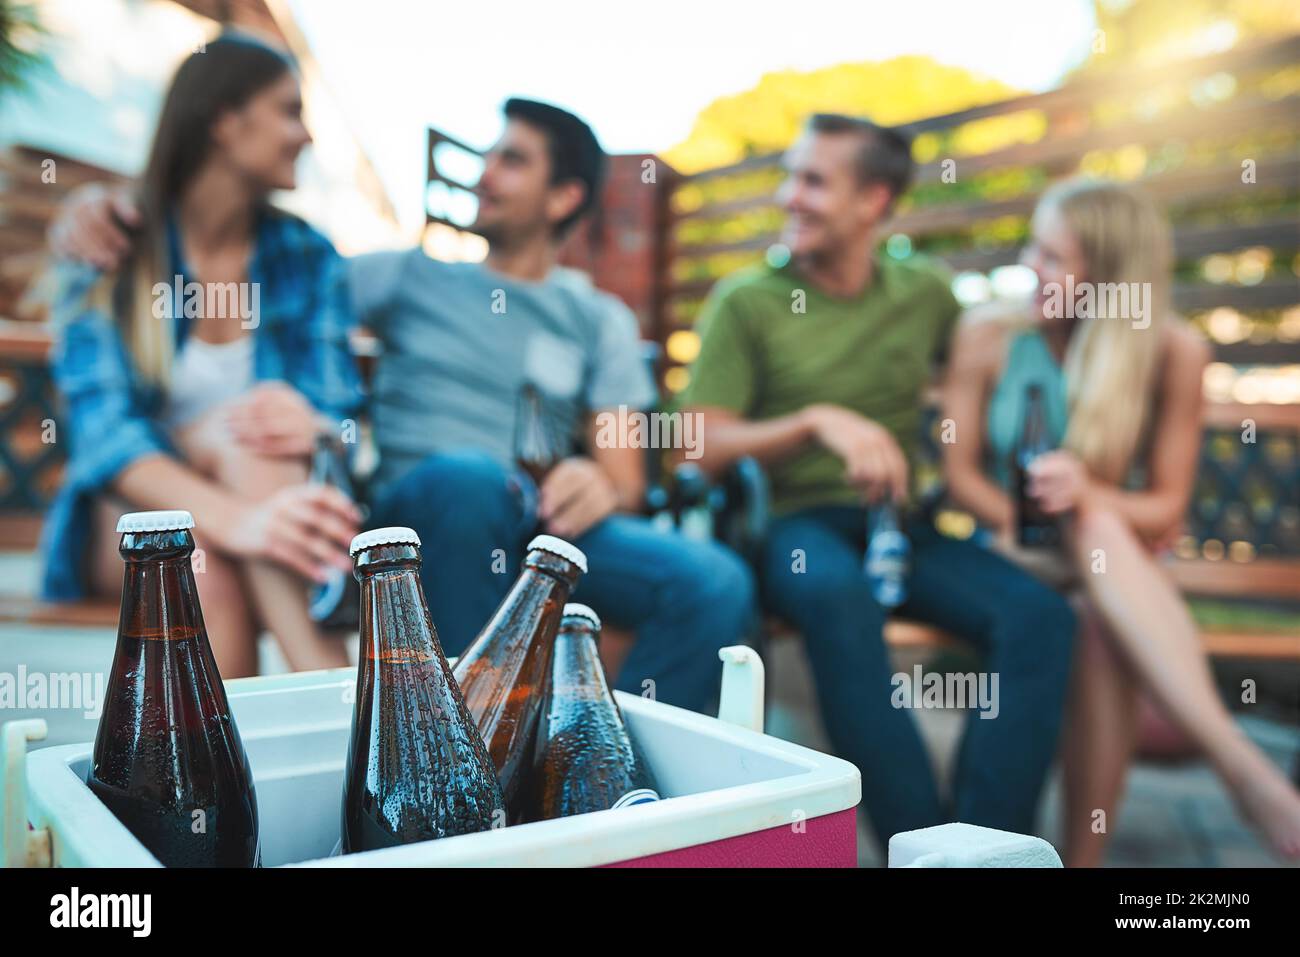 They dont call it a chill out session for nothing. Shot of bottled beers chilling in a cooler box with a group of friends hanging out in the background. Stock Photo